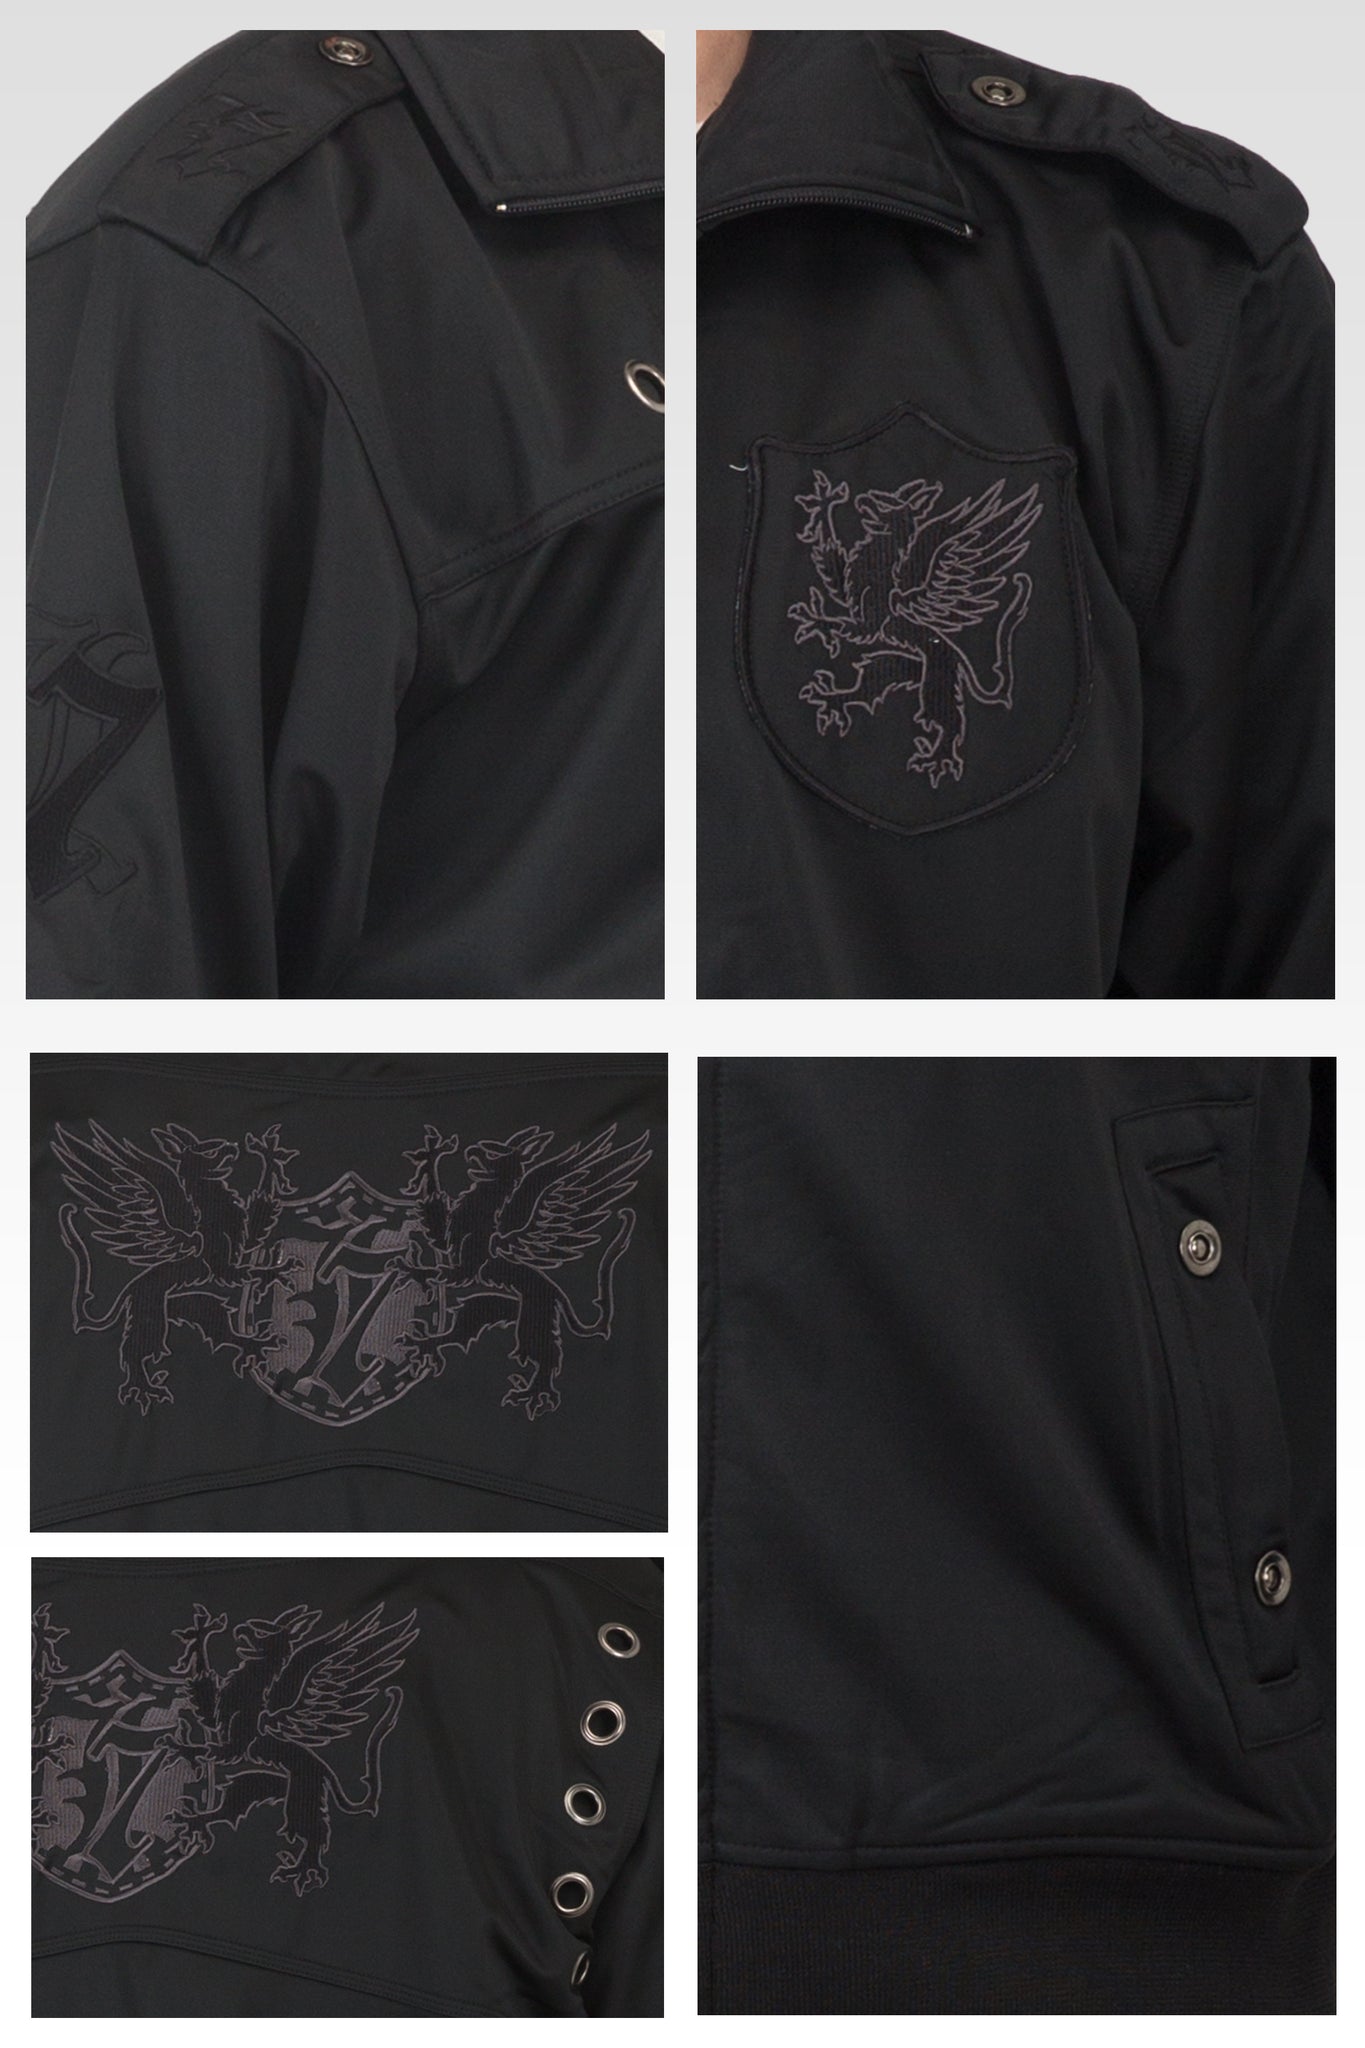 Men's Black Poly Performance Full Zip Track Jacket With Black EMB Patches